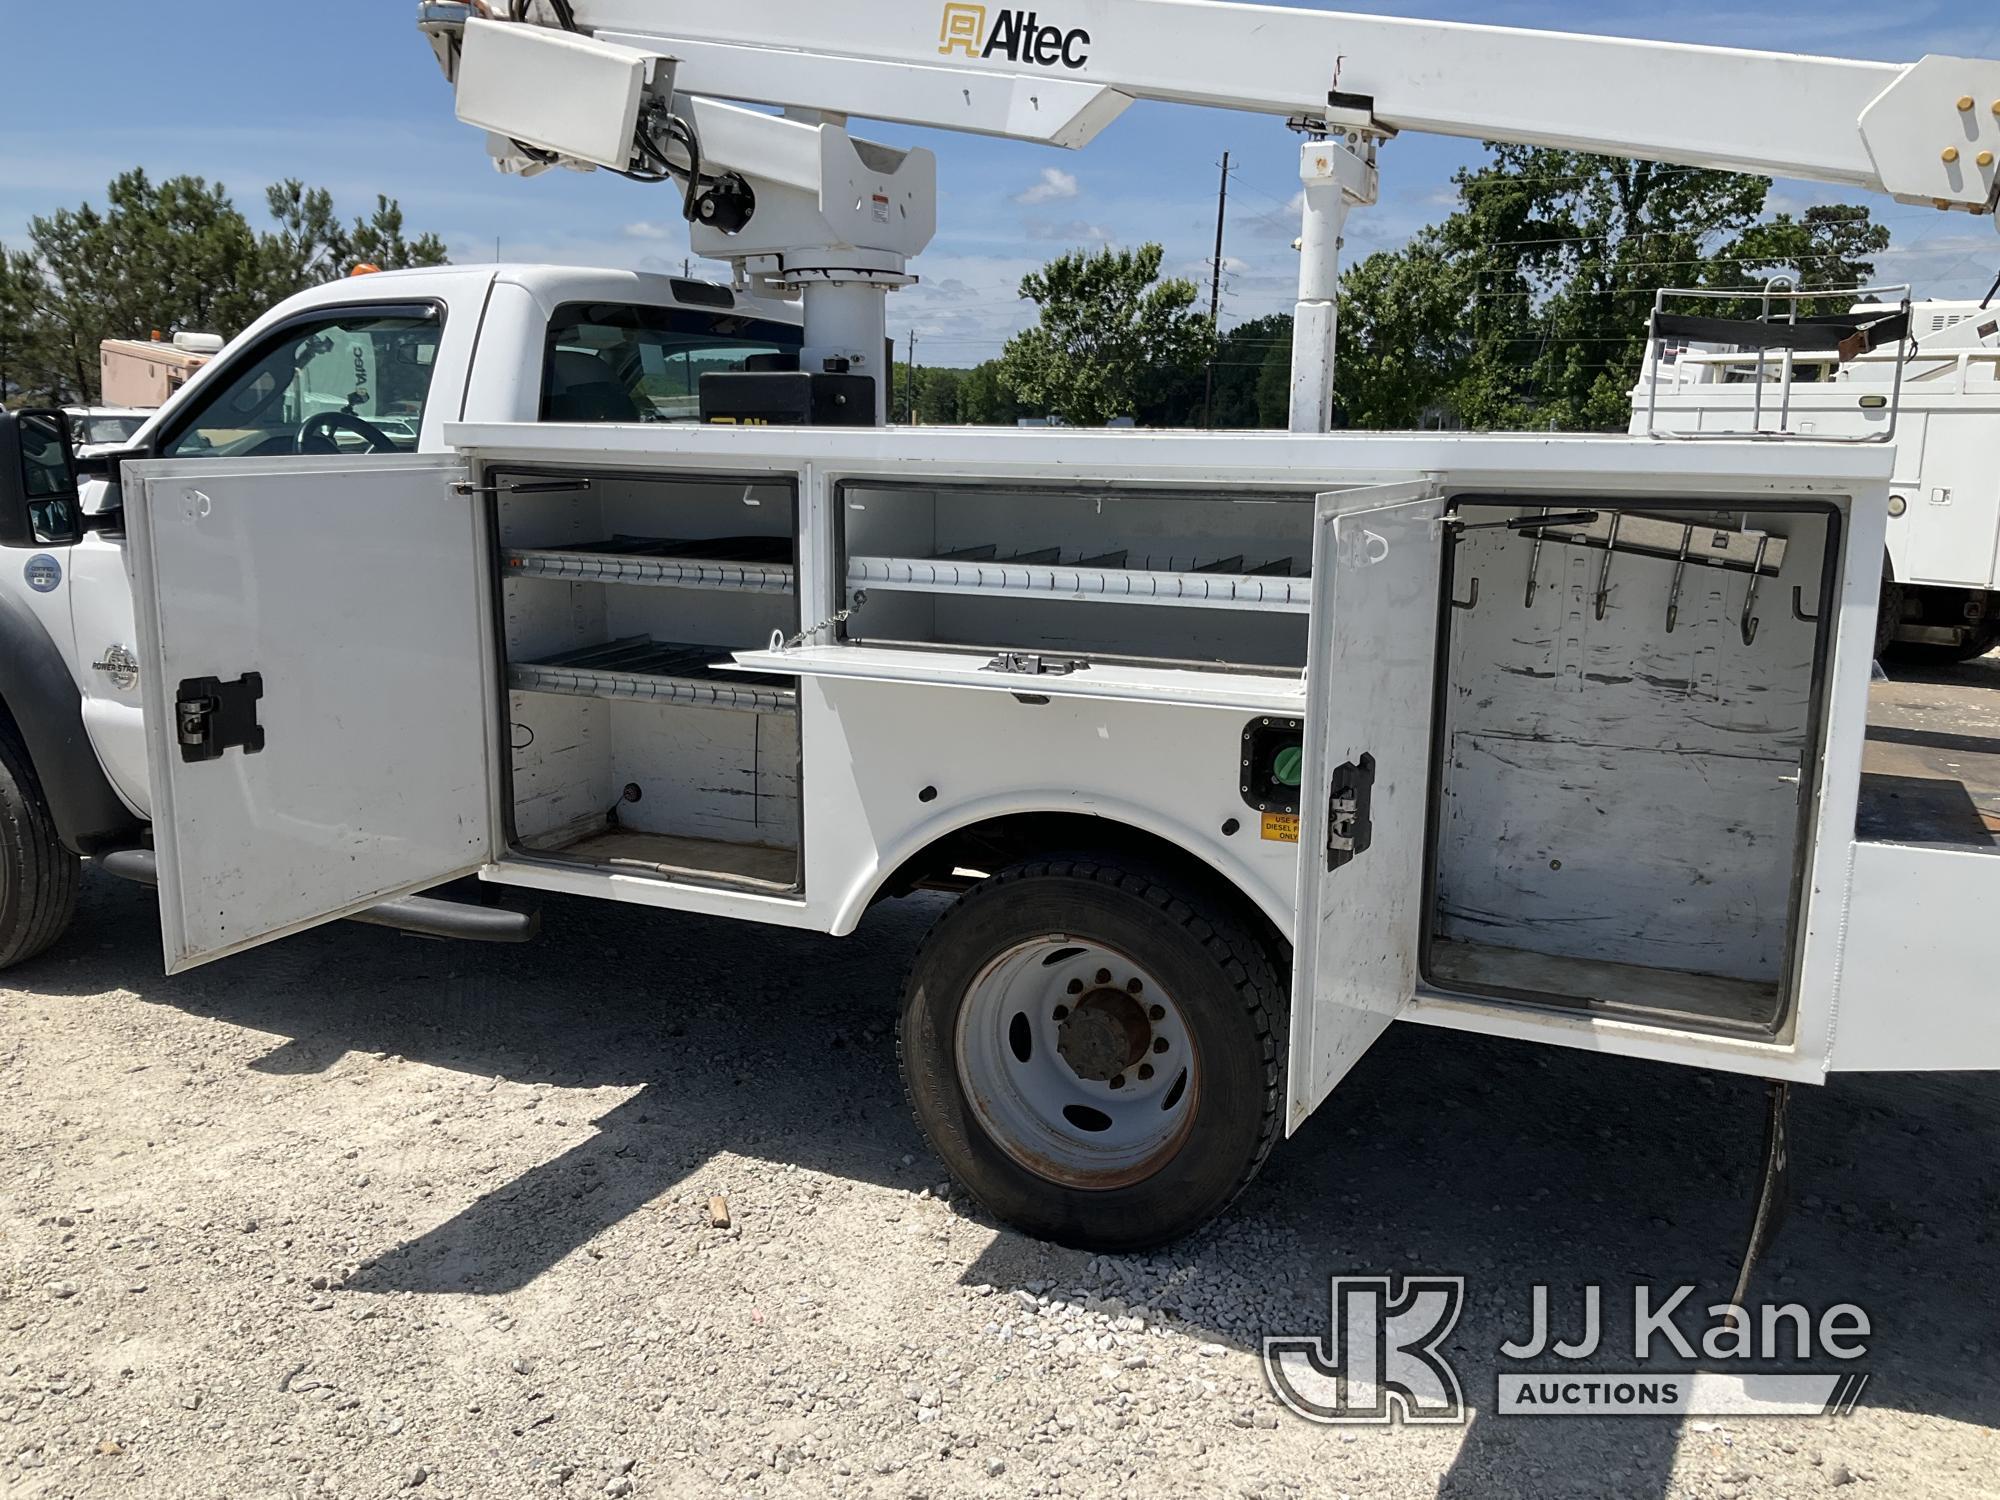 (Villa Rica, GA) Altec AT200-A, Telescopic Non-Insulated Bucket Truck mounted behind cab on 2016 For